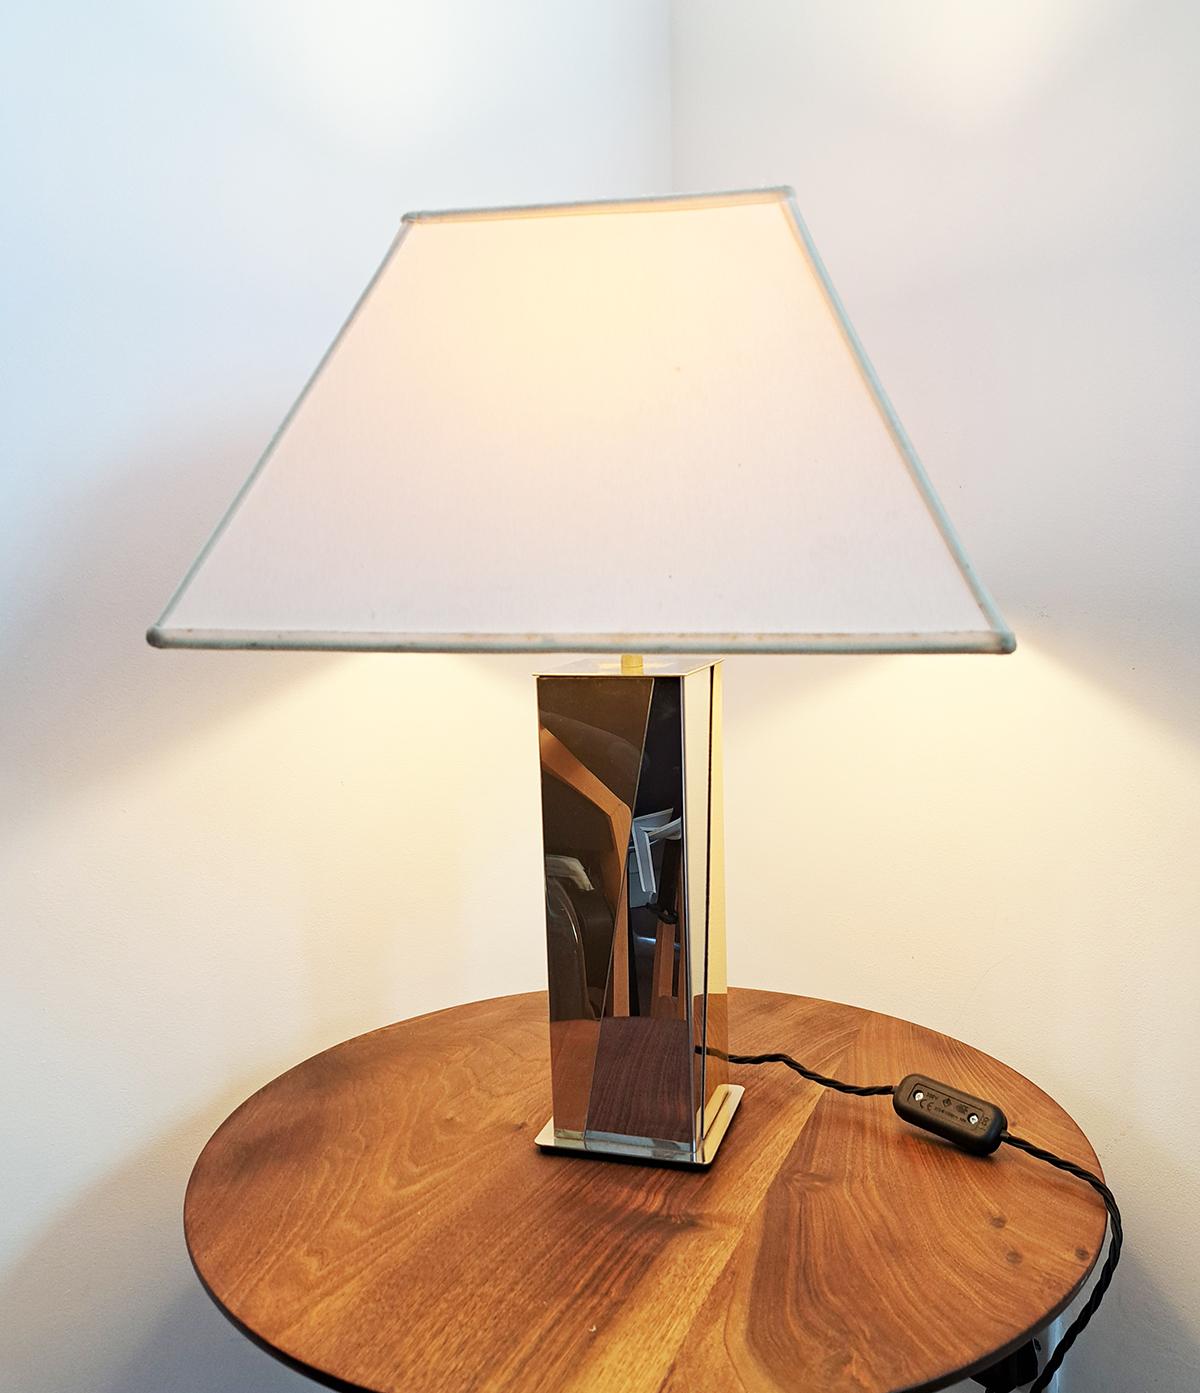 Regency Design able Lamp by Belgo Chrome, Belgium 1970s, a lovely piece with gold and chrome plated finish. in good overall condition. Newly rewired with a switch on a black cable. 